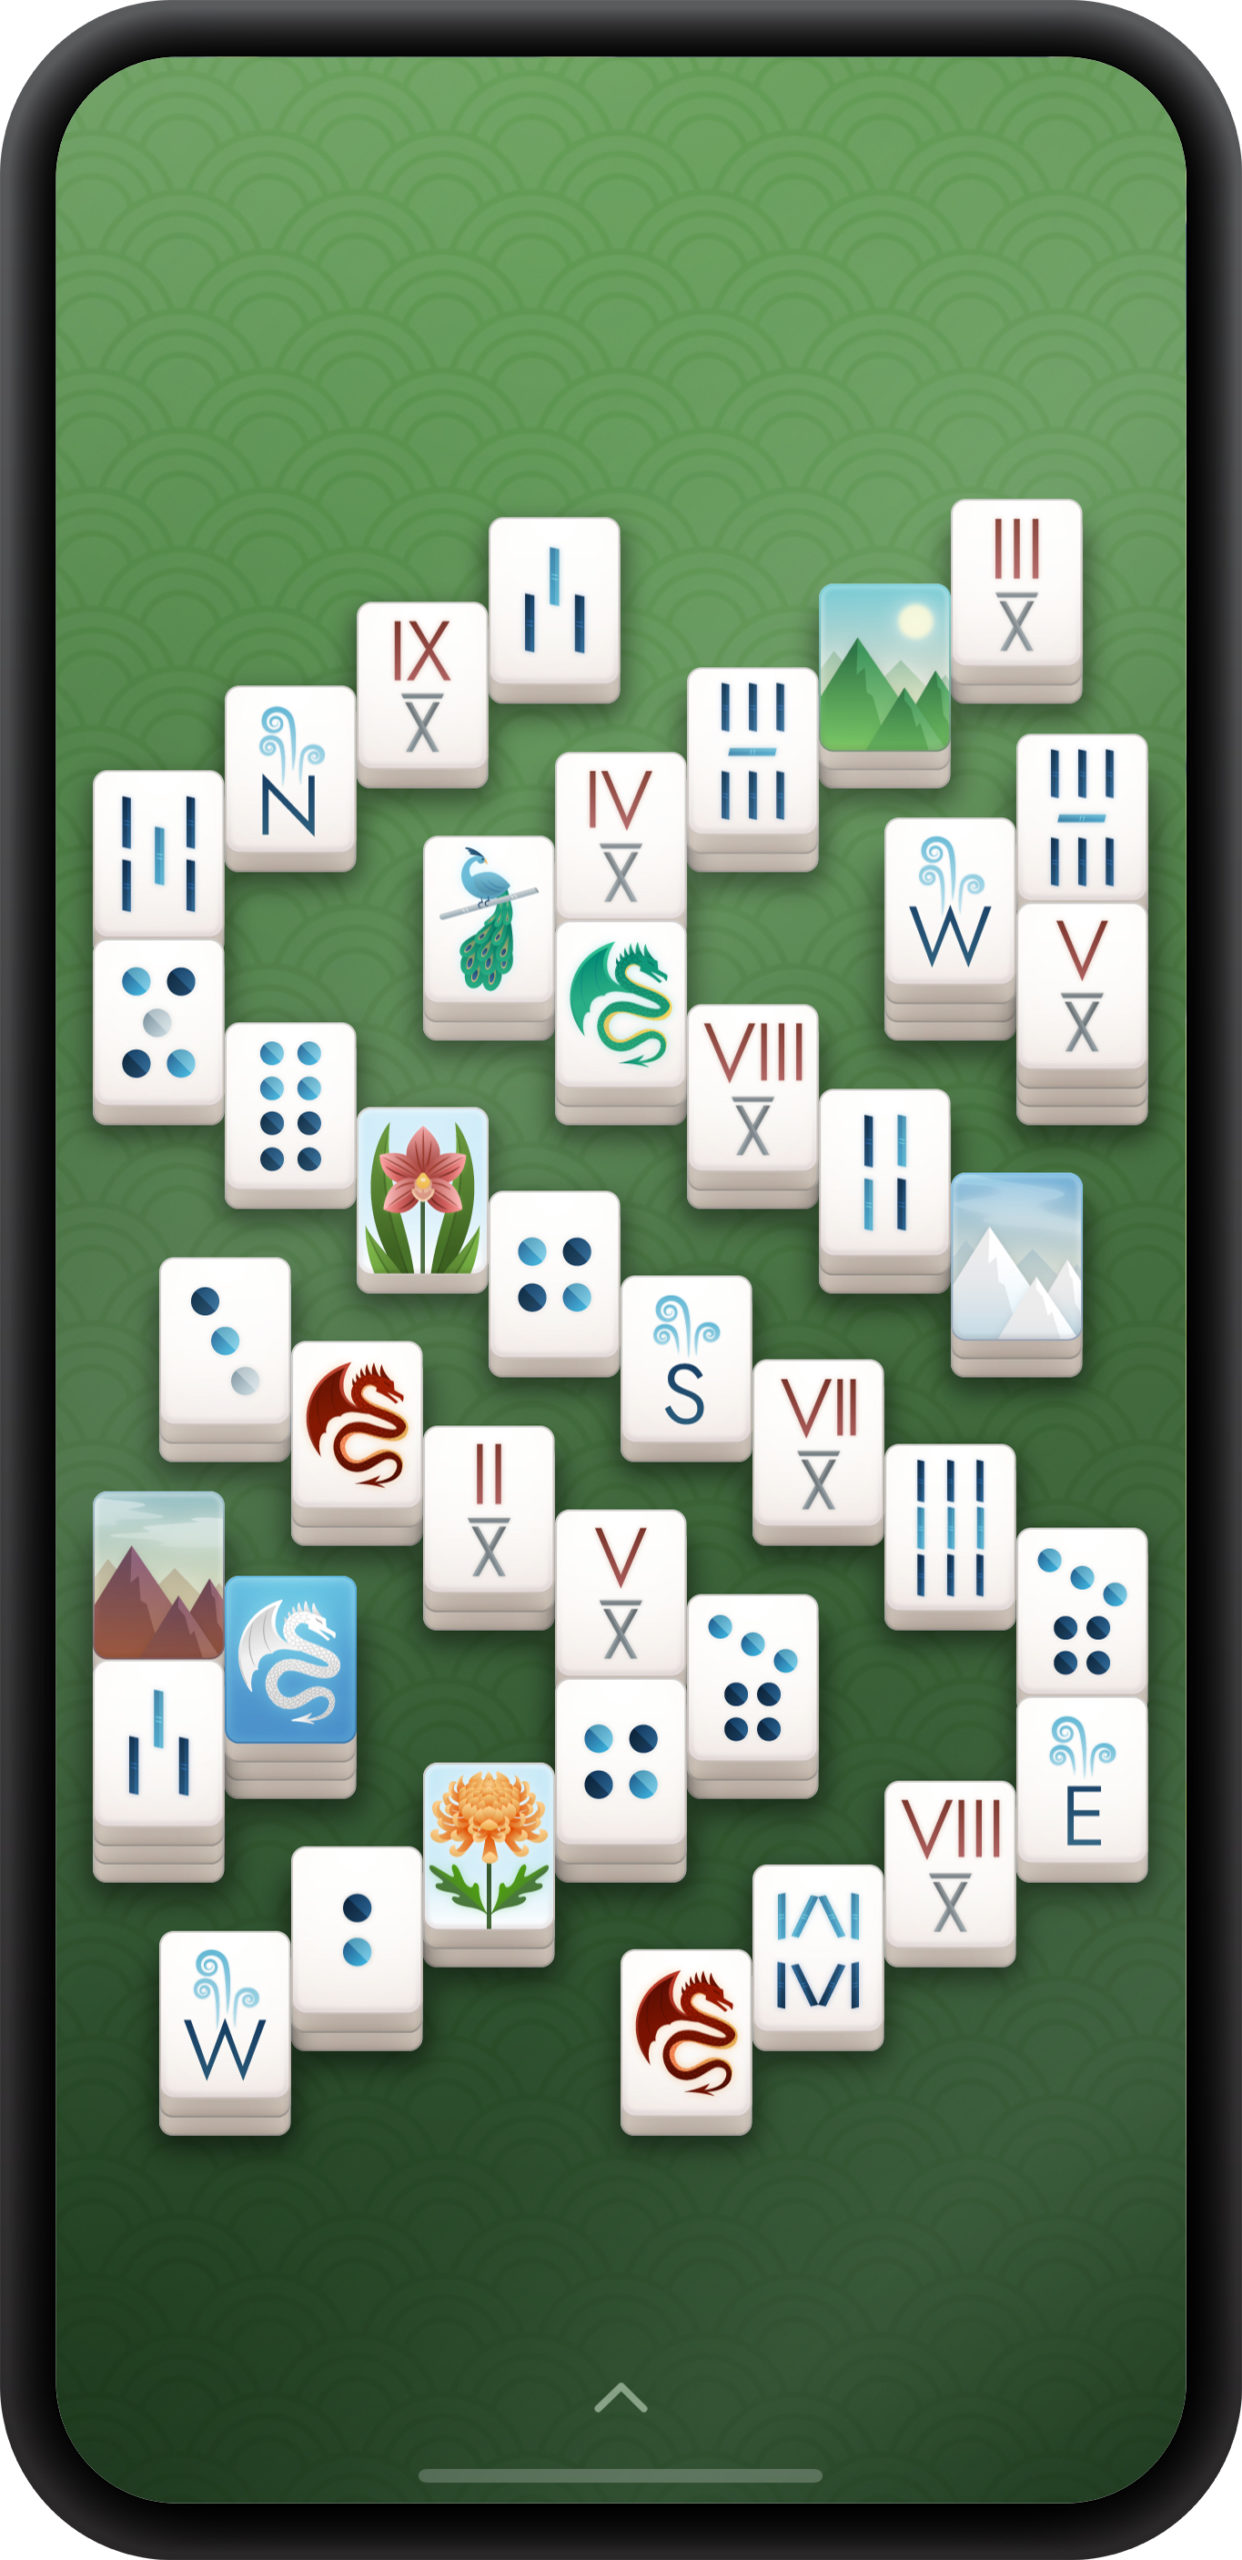 Download Mahjong - Brain Puzzle Games for iOS - Free - 1.3